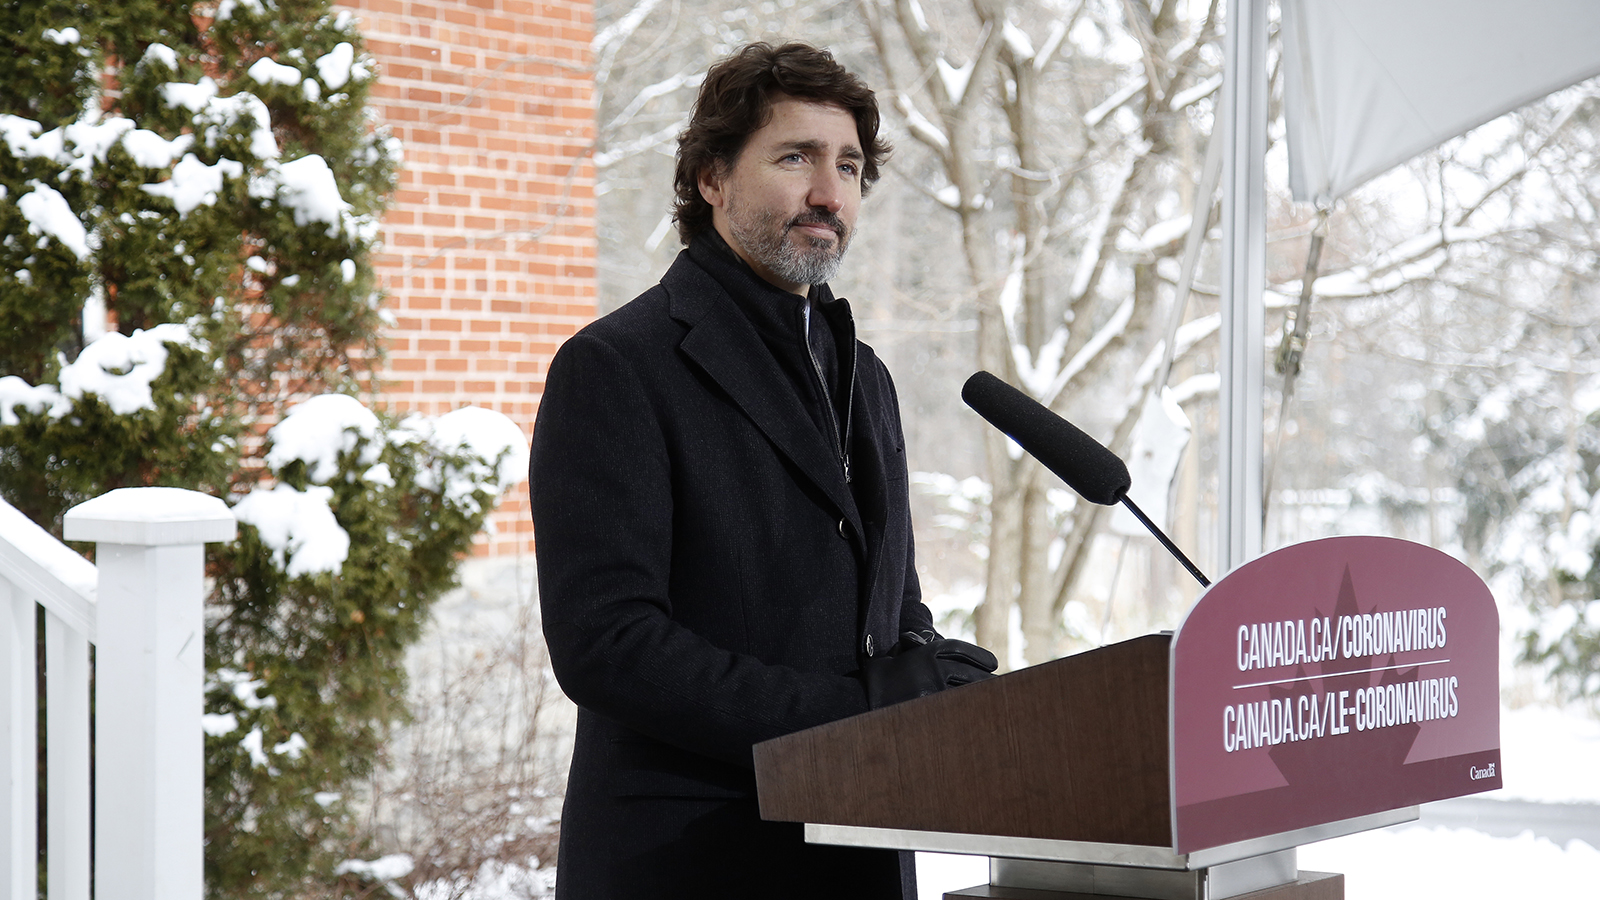 Prime Minister Justin Trudeau listens during a news conference at Rideau Cottage in Ottawa, Ontario, on Tuesday, January 5.